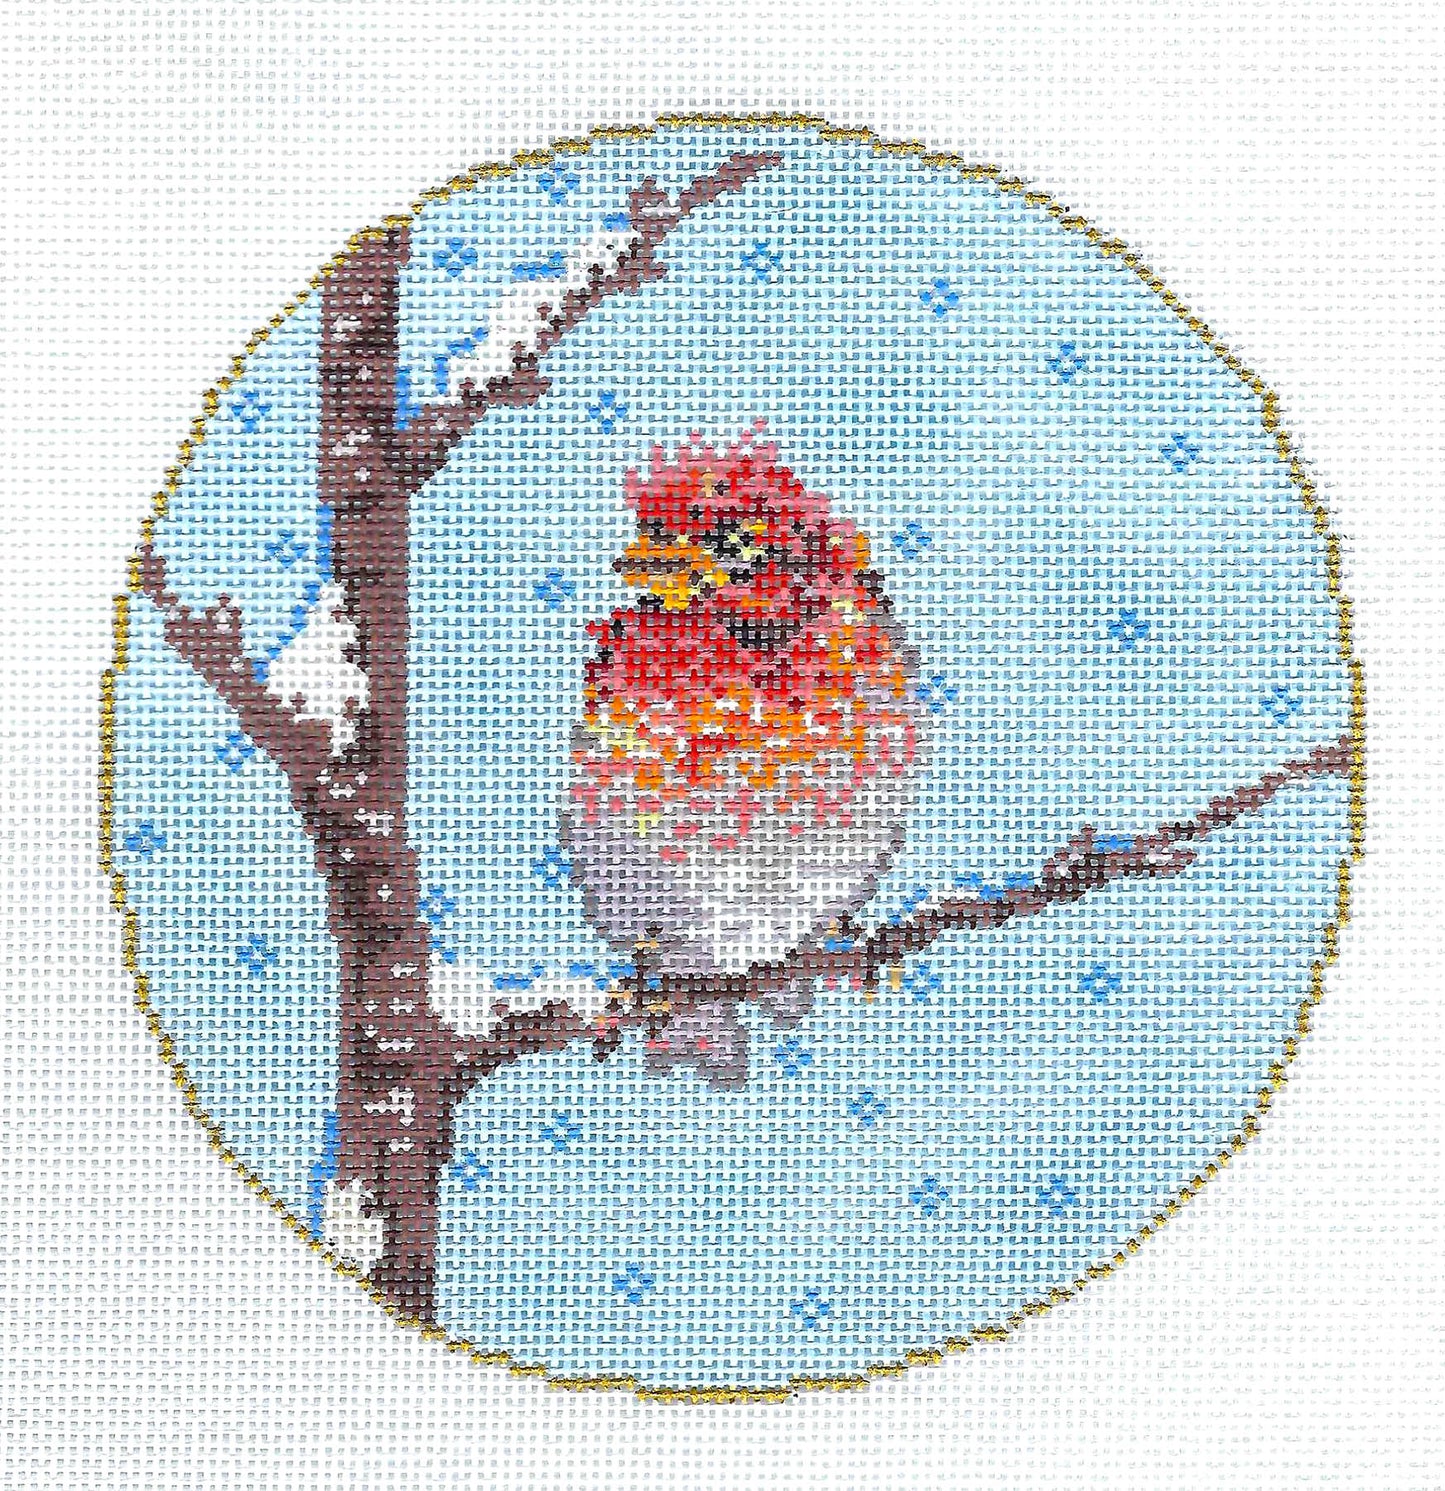 Bird ~ "Lil Chipper" on a Snowy Branch handpainted Needlepoint Canvas by Sandra Gilmore